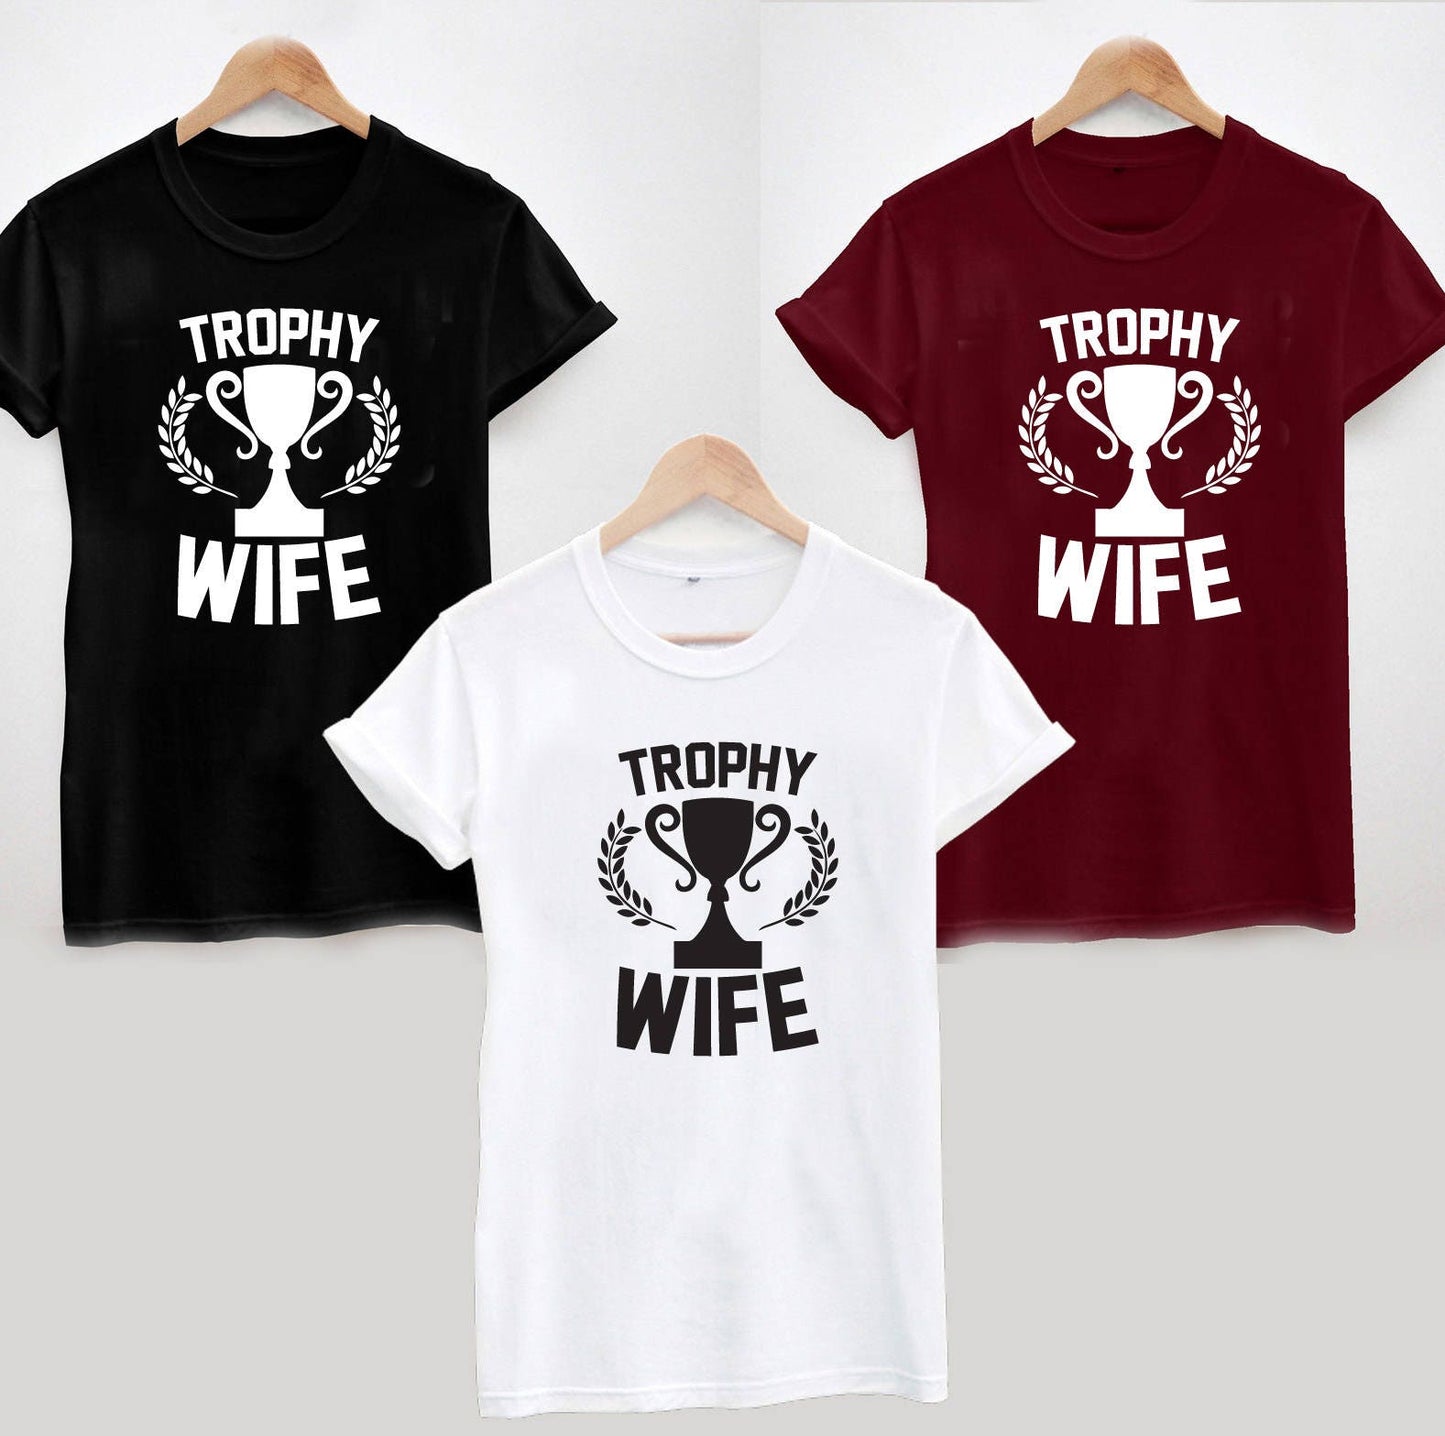 Trophy Wife T-Shirt - Funny Cool Ladies Unisex